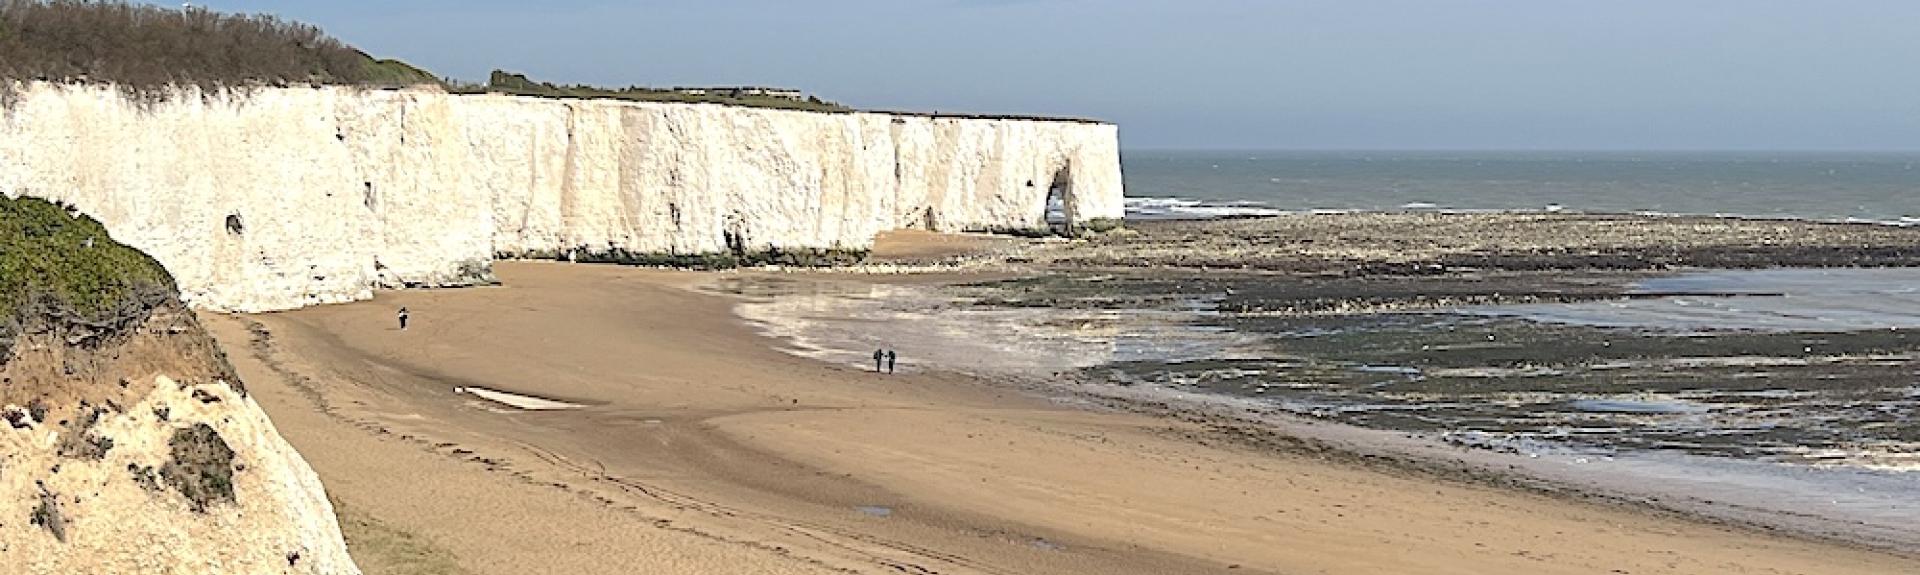 White cliffs at Broadstairs tower above a sandy beach at low tide on a clear summer's day.